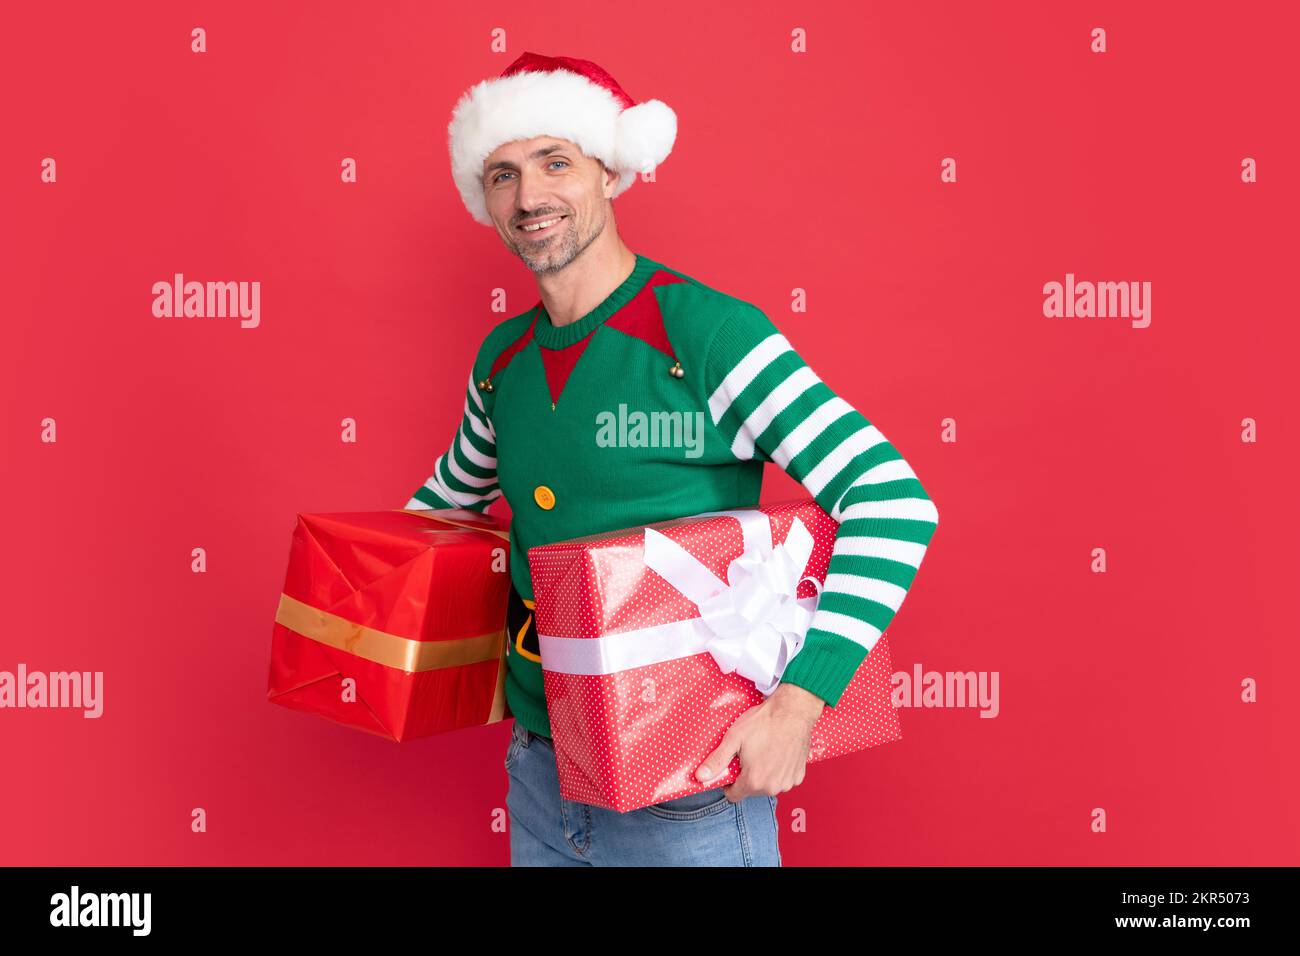 merry christmas gift. happy smiling man in elf costume and santa claus hat. xmas guy Stock Photo